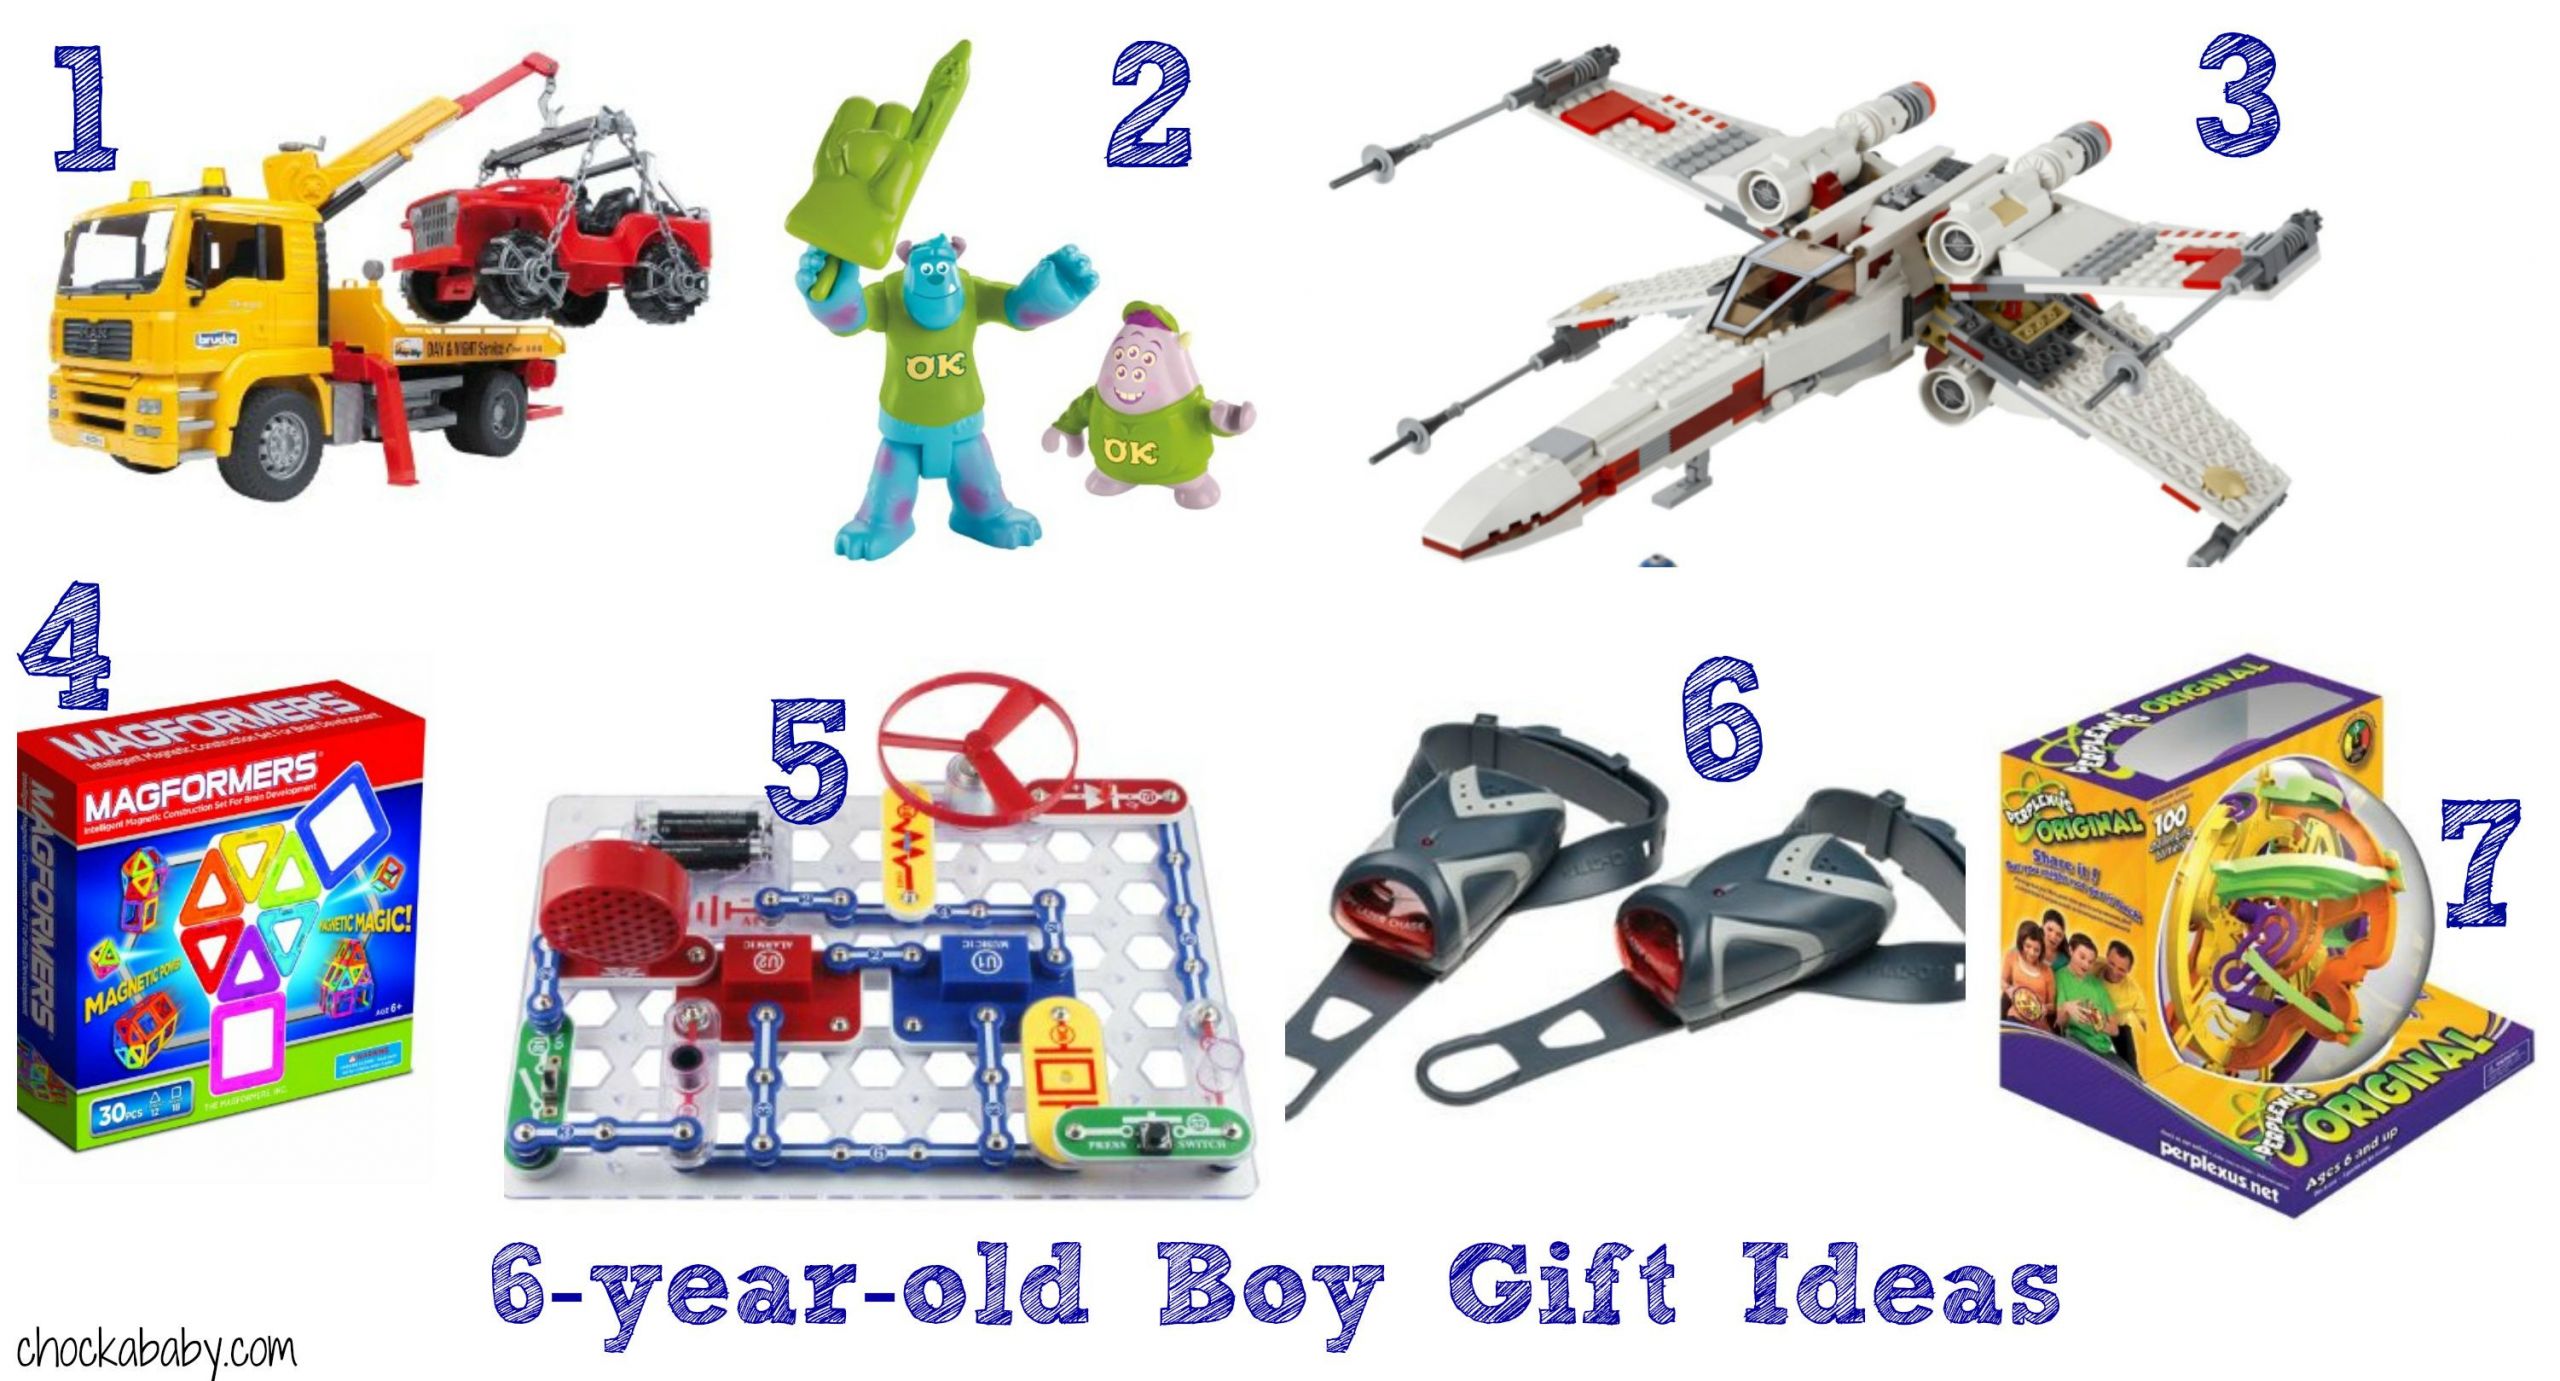 6 Year Old Birthday Gift Ideas
 t ideas for 6 year old boys